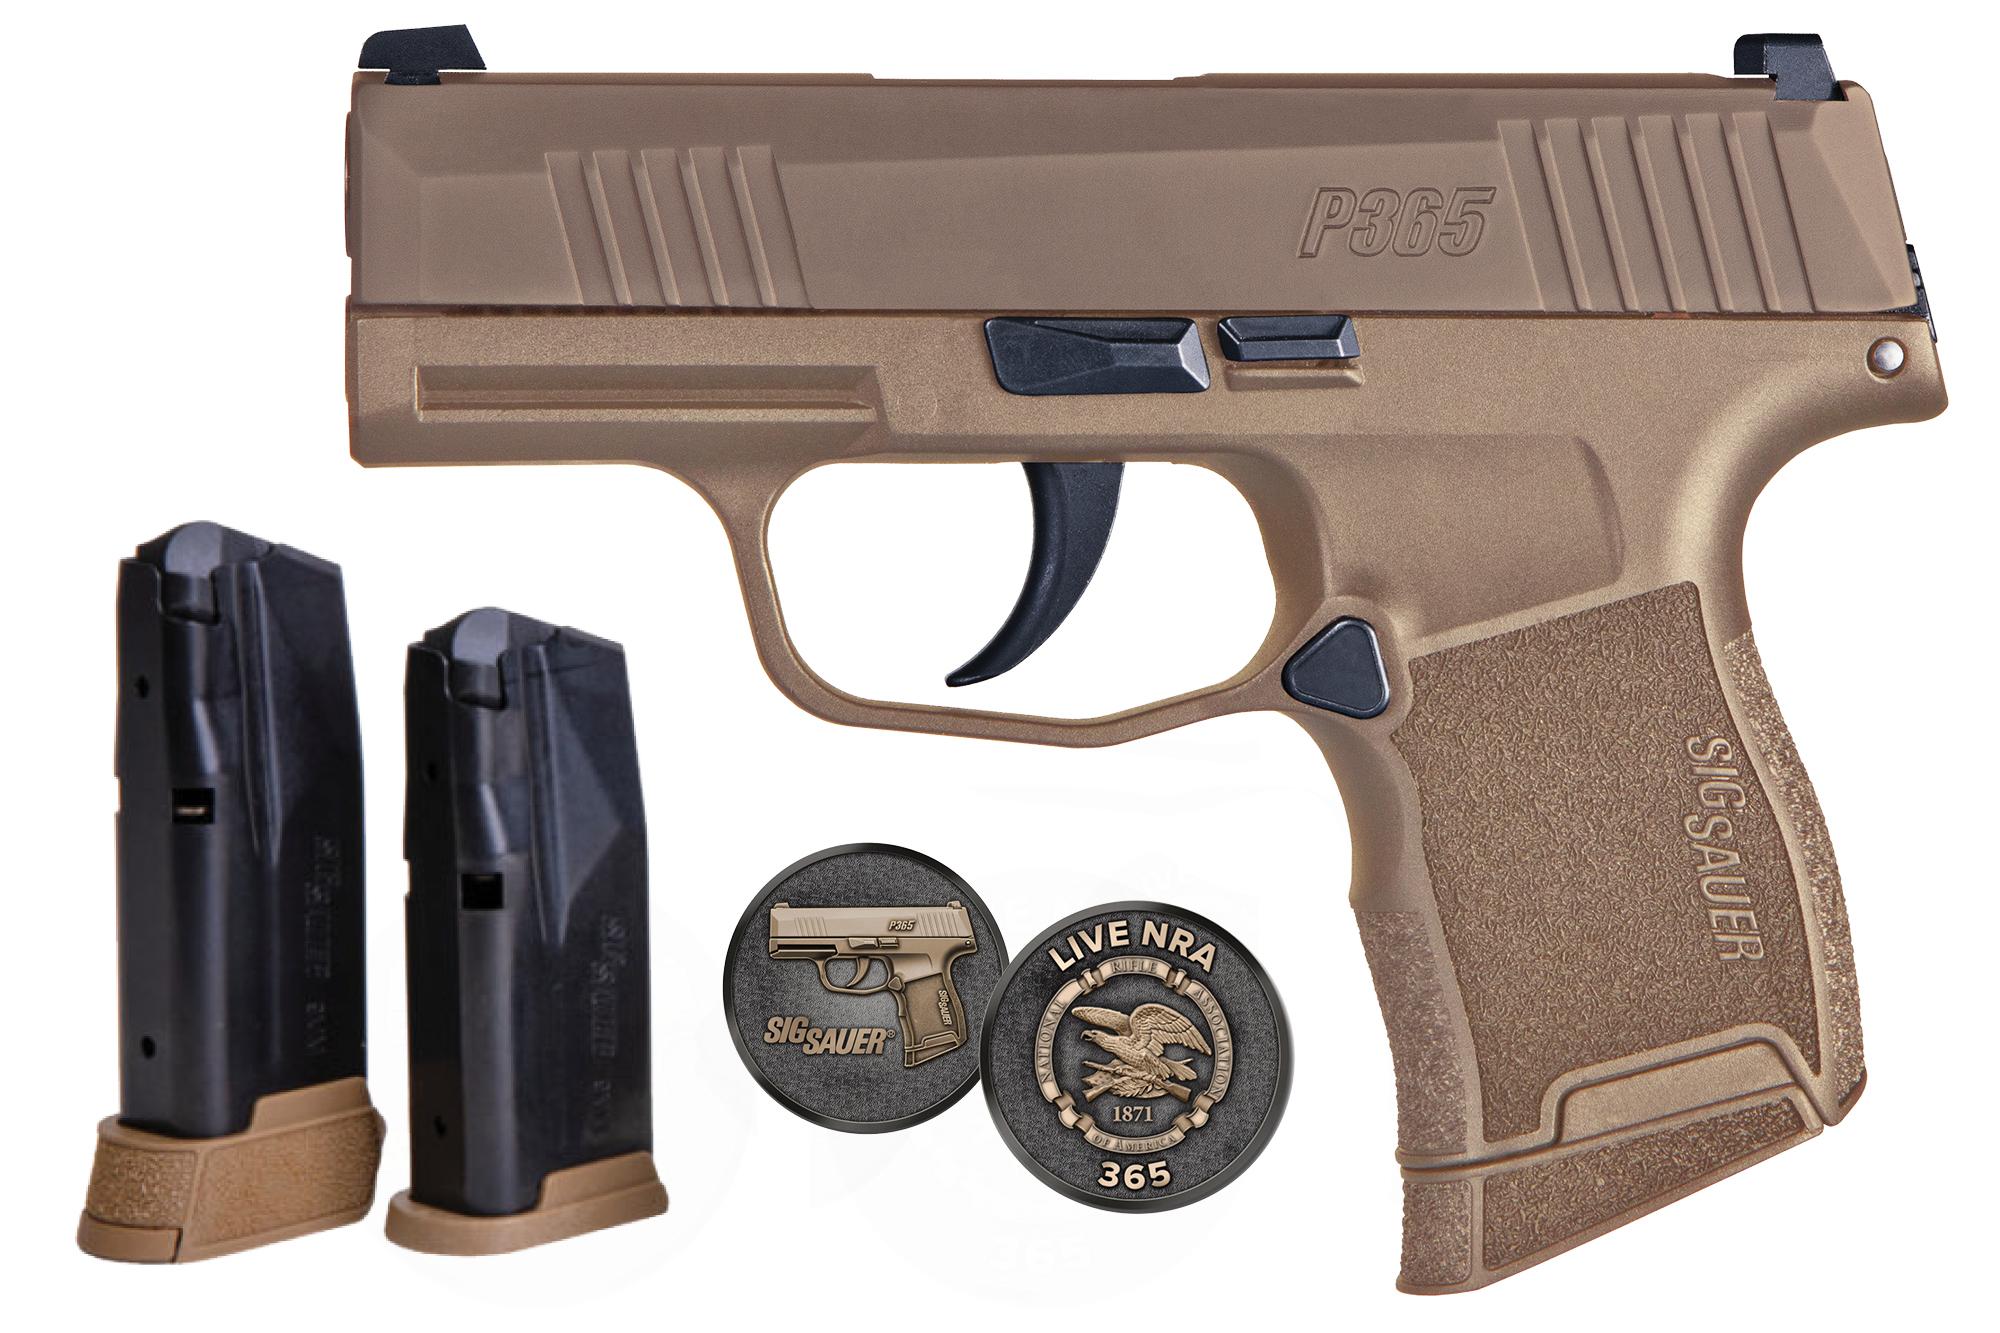 P365 Coyote Nra 9mm